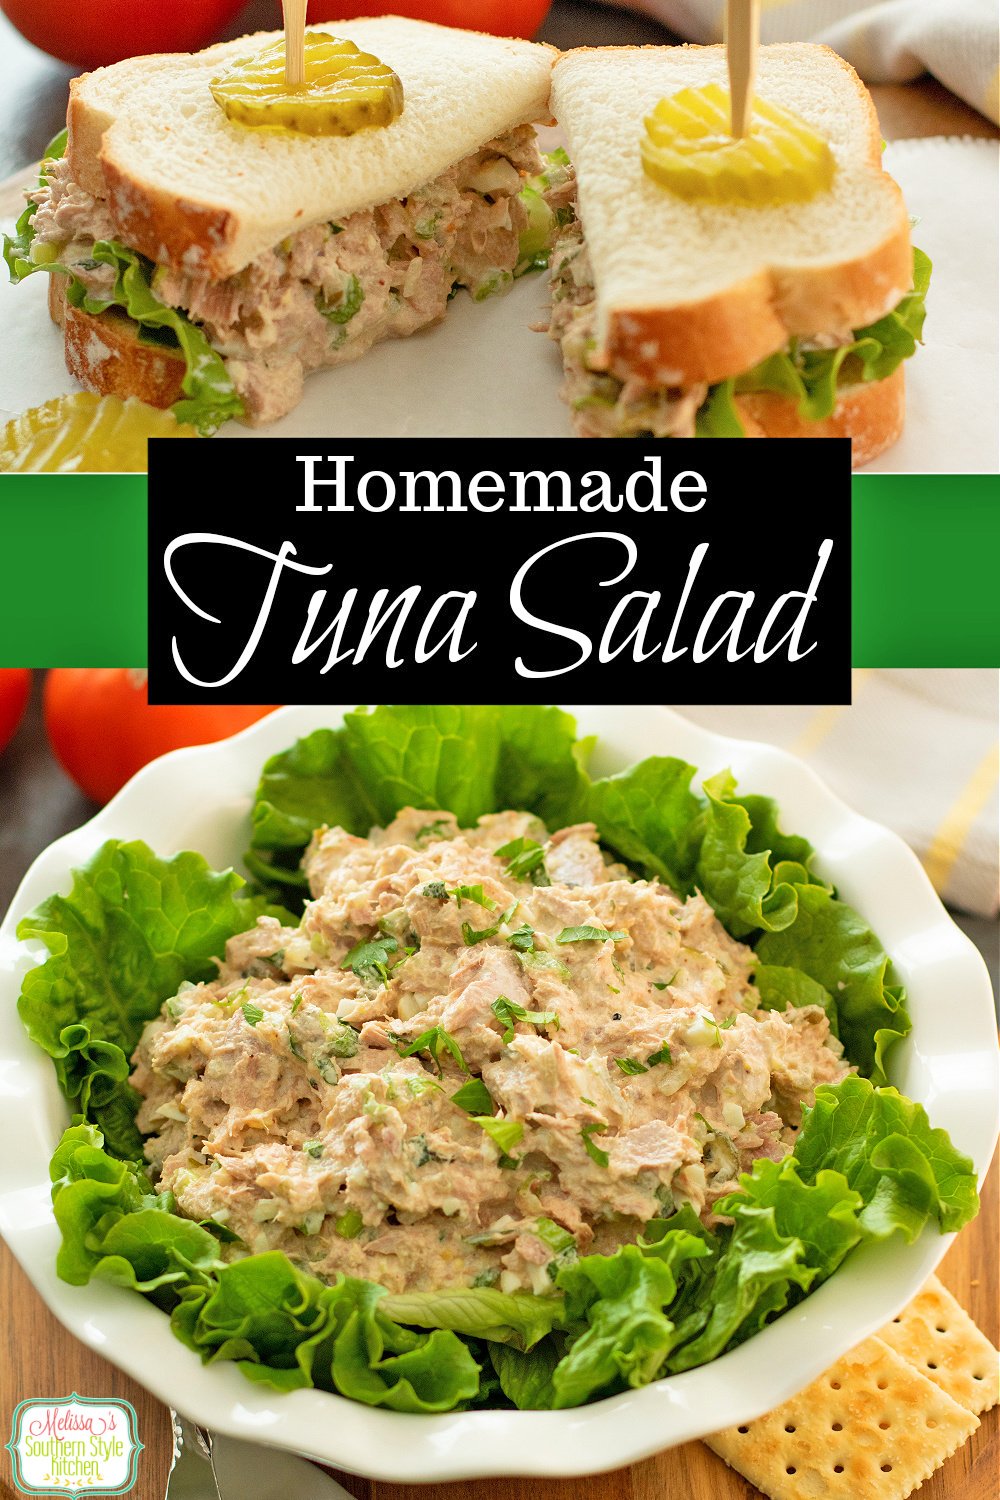 This easy Tuna Salad Recipe can be served on fresh bread, stuffed into buttery croissants, on a bed of lettuce or with crackers. #tunasalad #tunarecipes #cannedtuna #albacoretuna #easyrecipes #saladrecipes #southernstyletuna #eggsalad